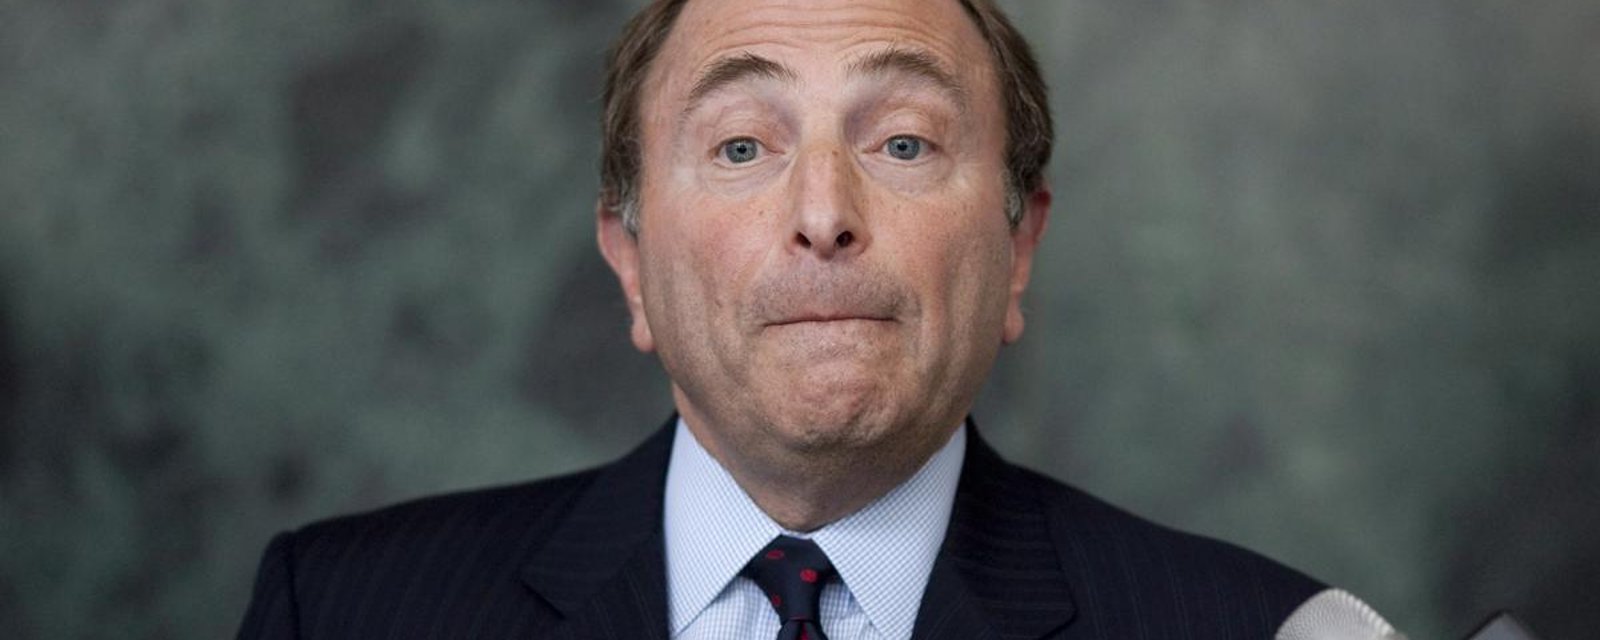 Gary Bettman makes a shocking statement about the return of the NHL in Quebec City